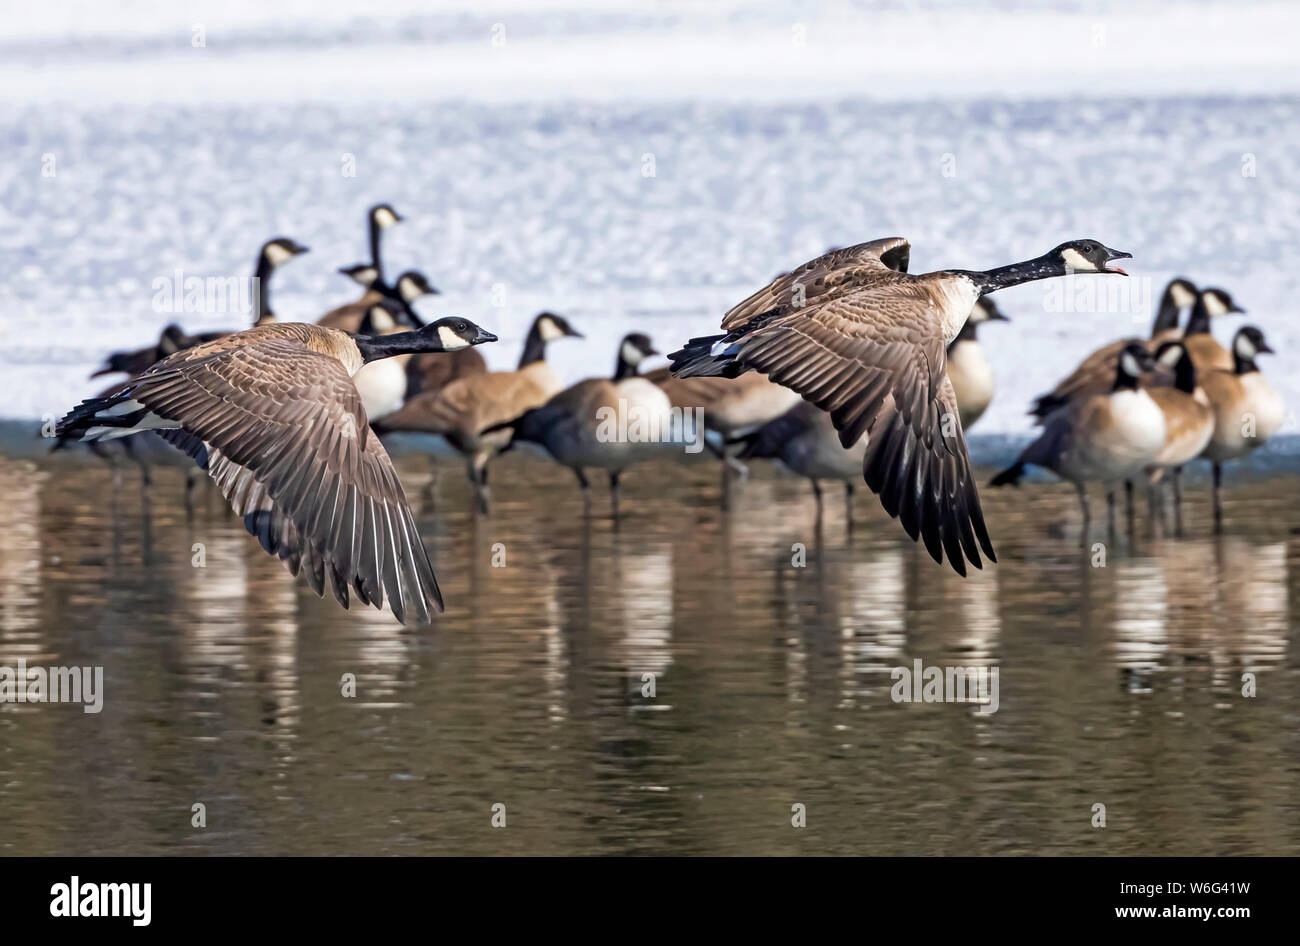 Canada geese (Branta canadensis) taking flight while others stand in the water in the background; Denver, Colorado, United States of America Stock Photo